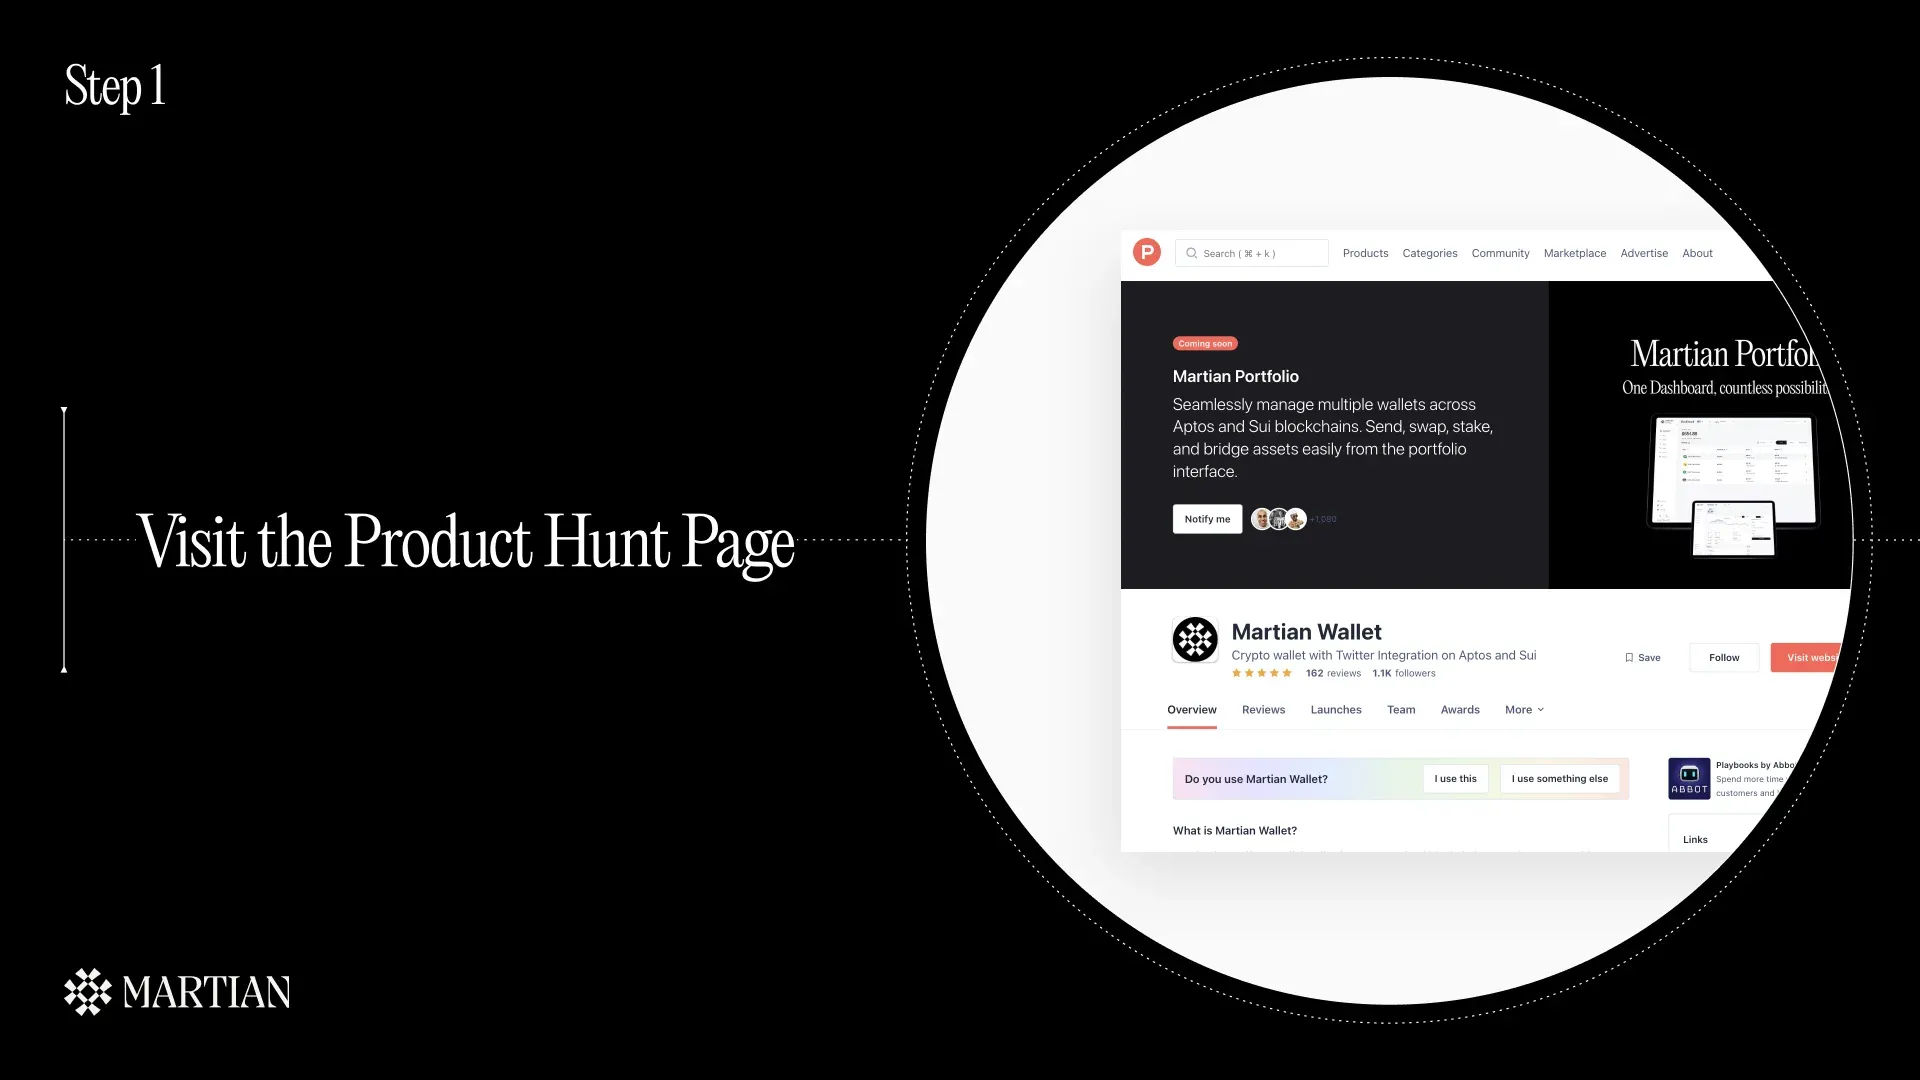 Visit the Product Hunt Page